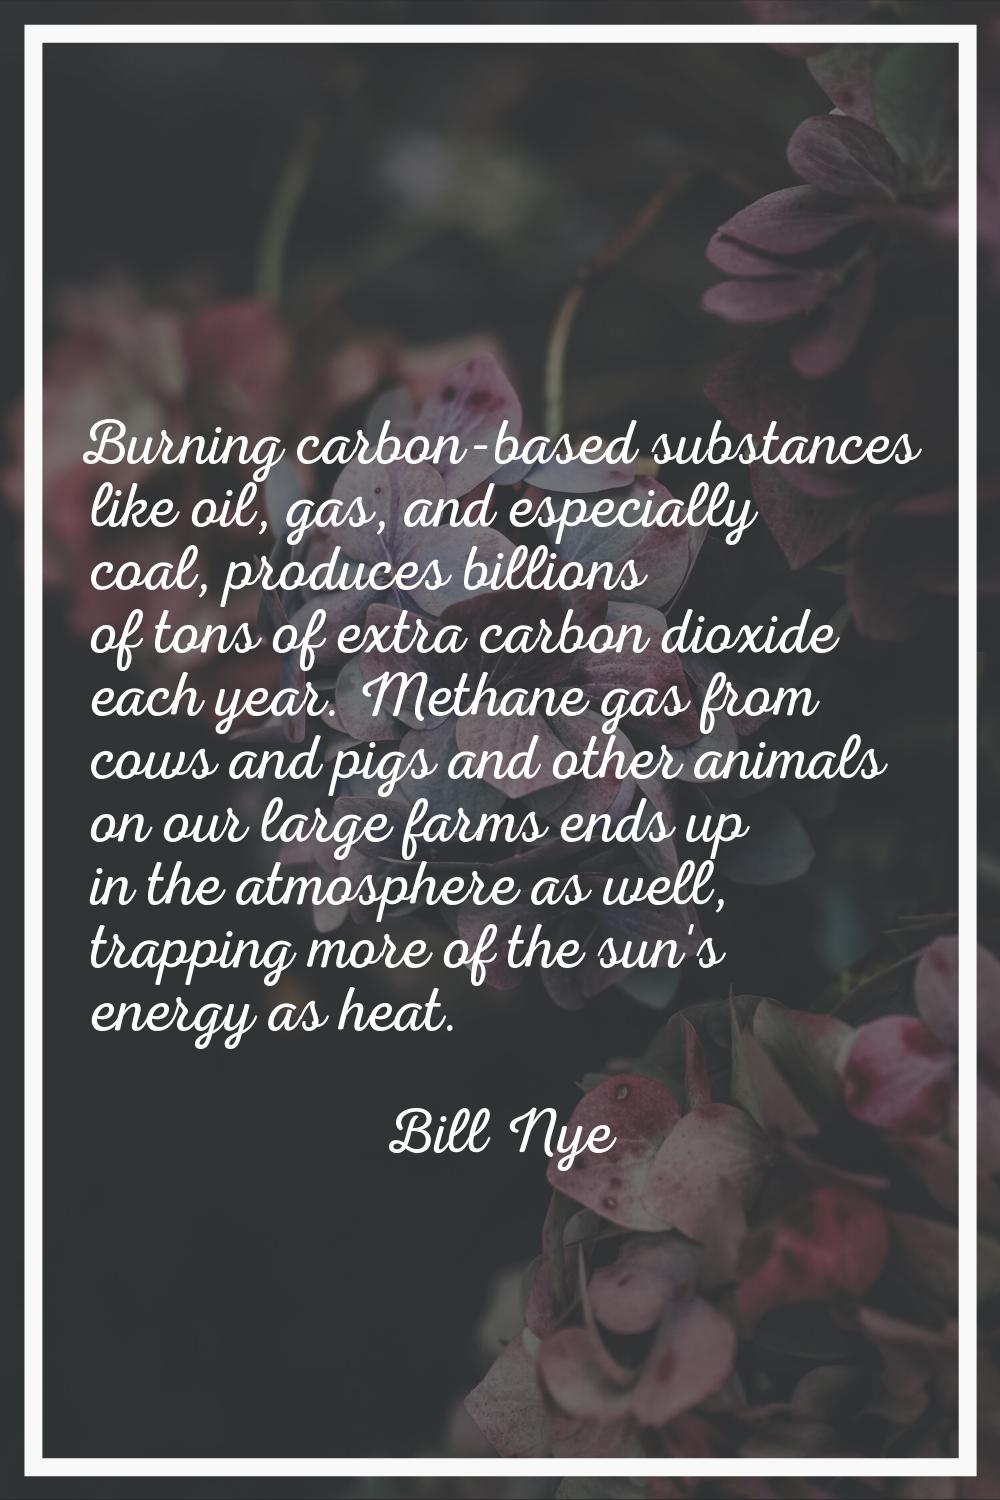 Burning carbon-based substances like oil, gas, and especially coal, produces billions of tons of ex